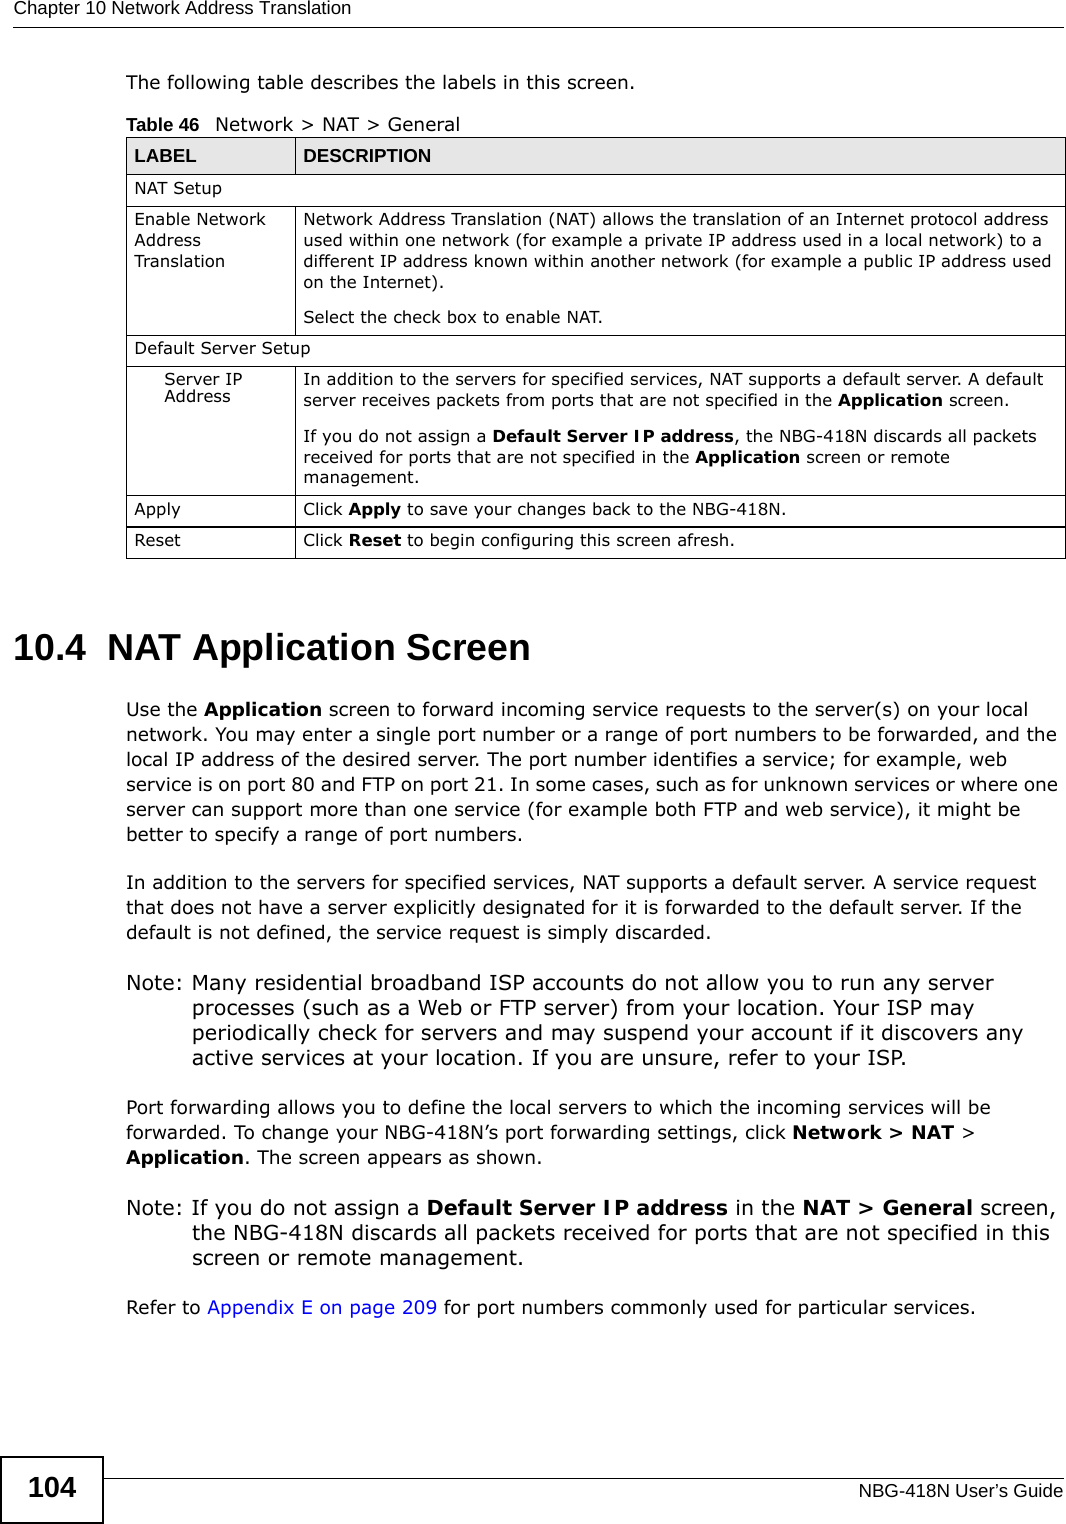 Chapter 10 Network Address TranslationNBG-418N User’s Guide104The following table describes the labels in this screen.10.4  NAT Application Screen   Use the Application screen to forward incoming service requests to the server(s) on your local network. You may enter a single port number or a range of port numbers to be forwarded, and the local IP address of the desired server. The port number identifies a service; for example, web service is on port 80 and FTP on port 21. In some cases, such as for unknown services or where one server can support more than one service (for example both FTP and web service), it might be better to specify a range of port numbers.In addition to the servers for specified services, NAT supports a default server. A service request that does not have a server explicitly designated for it is forwarded to the default server. If the default is not defined, the service request is simply discarded.Note: Many residential broadband ISP accounts do not allow you to run any server processes (such as a Web or FTP server) from your location. Your ISP may periodically check for servers and may suspend your account if it discovers any active services at your location. If you are unsure, refer to your ISP.Port forwarding allows you to define the local servers to which the incoming services will be forwarded. To change your NBG-418N’s port forwarding settings, click Network &gt; NAT &gt; Application. The screen appears as shown.Note: If you do not assign a Default Server IP address in the NAT &gt; General screen, the NBG-418N discards all packets received for ports that are not specified in this screen or remote management.Refer to Appendix E on page 209 for port numbers commonly used for particular services.Table 46   Network &gt; NAT &gt; GeneralLABEL DESCRIPTIONNAT SetupEnable Network Address TranslationNetwork Address Translation (NAT) allows the translation of an Internet protocol address used within one network (for example a private IP address used in a local network) to a different IP address known within another network (for example a public IP address used on the Internet). Select the check box to enable NAT.Default Server SetupServer IP Address In addition to the servers for specified services, NAT supports a default server. A default server receives packets from ports that are not specified in the Application screen. If you do not assign a Default Server IP address, the NBG-418N discards all packets received for ports that are not specified in the Application screen or remote management.Apply Click Apply to save your changes back to the NBG-418N.Reset Click Reset to begin configuring this screen afresh.